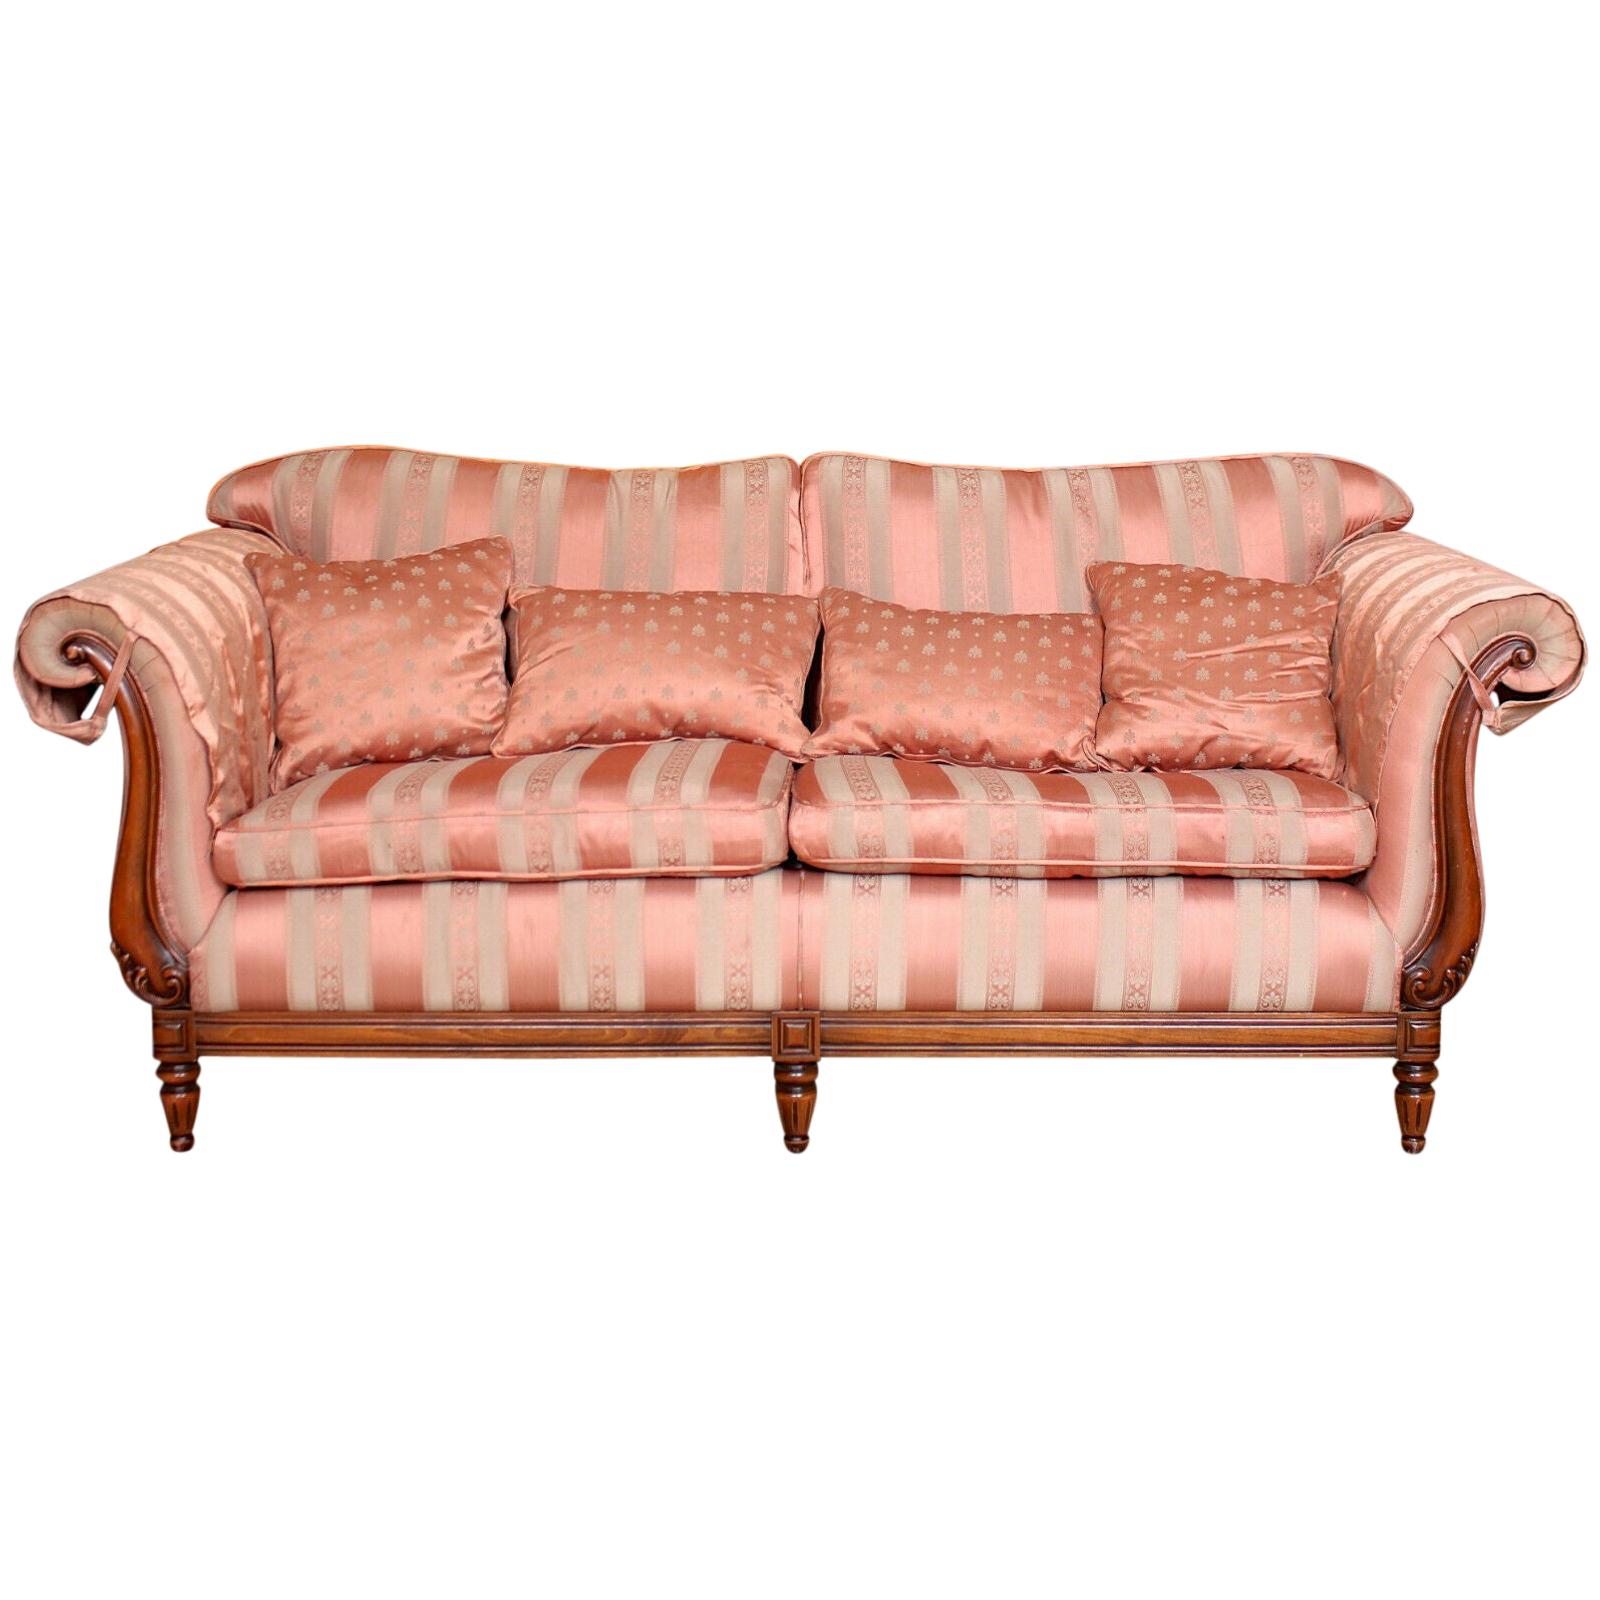 English Sofa 3-Seat Carved Mahogany Couch For Sale